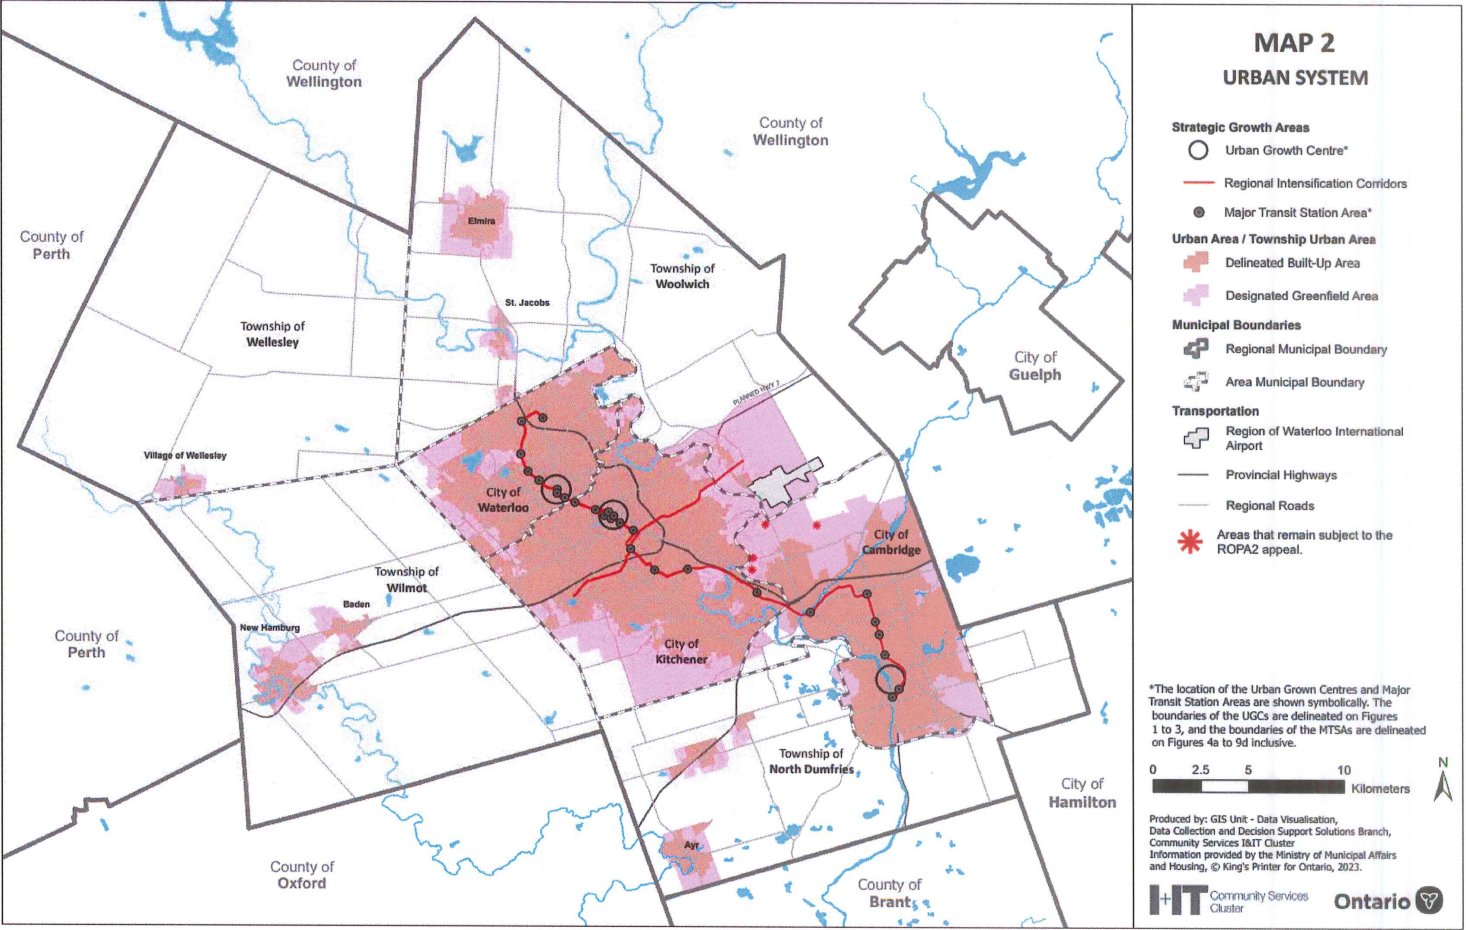 A map showing the Ontario government's revisions to Waterloo Region's urban development plans